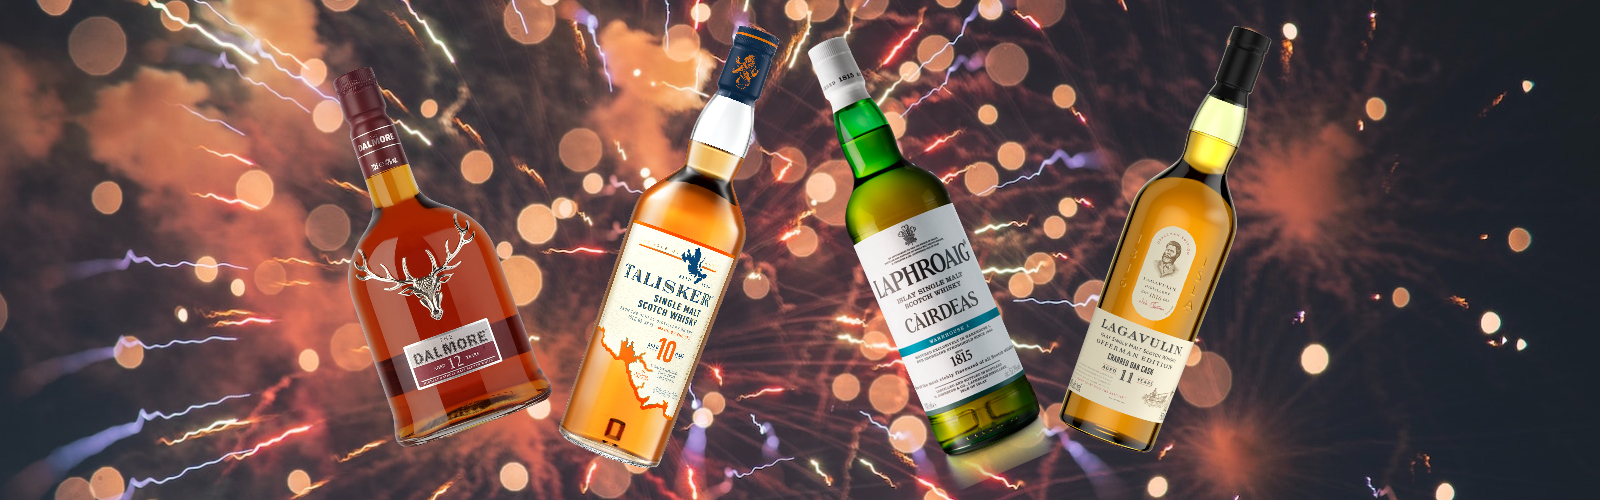 The Best Scotch Single Malt Whiskies Under $100 For Your New Year’s Eve Party